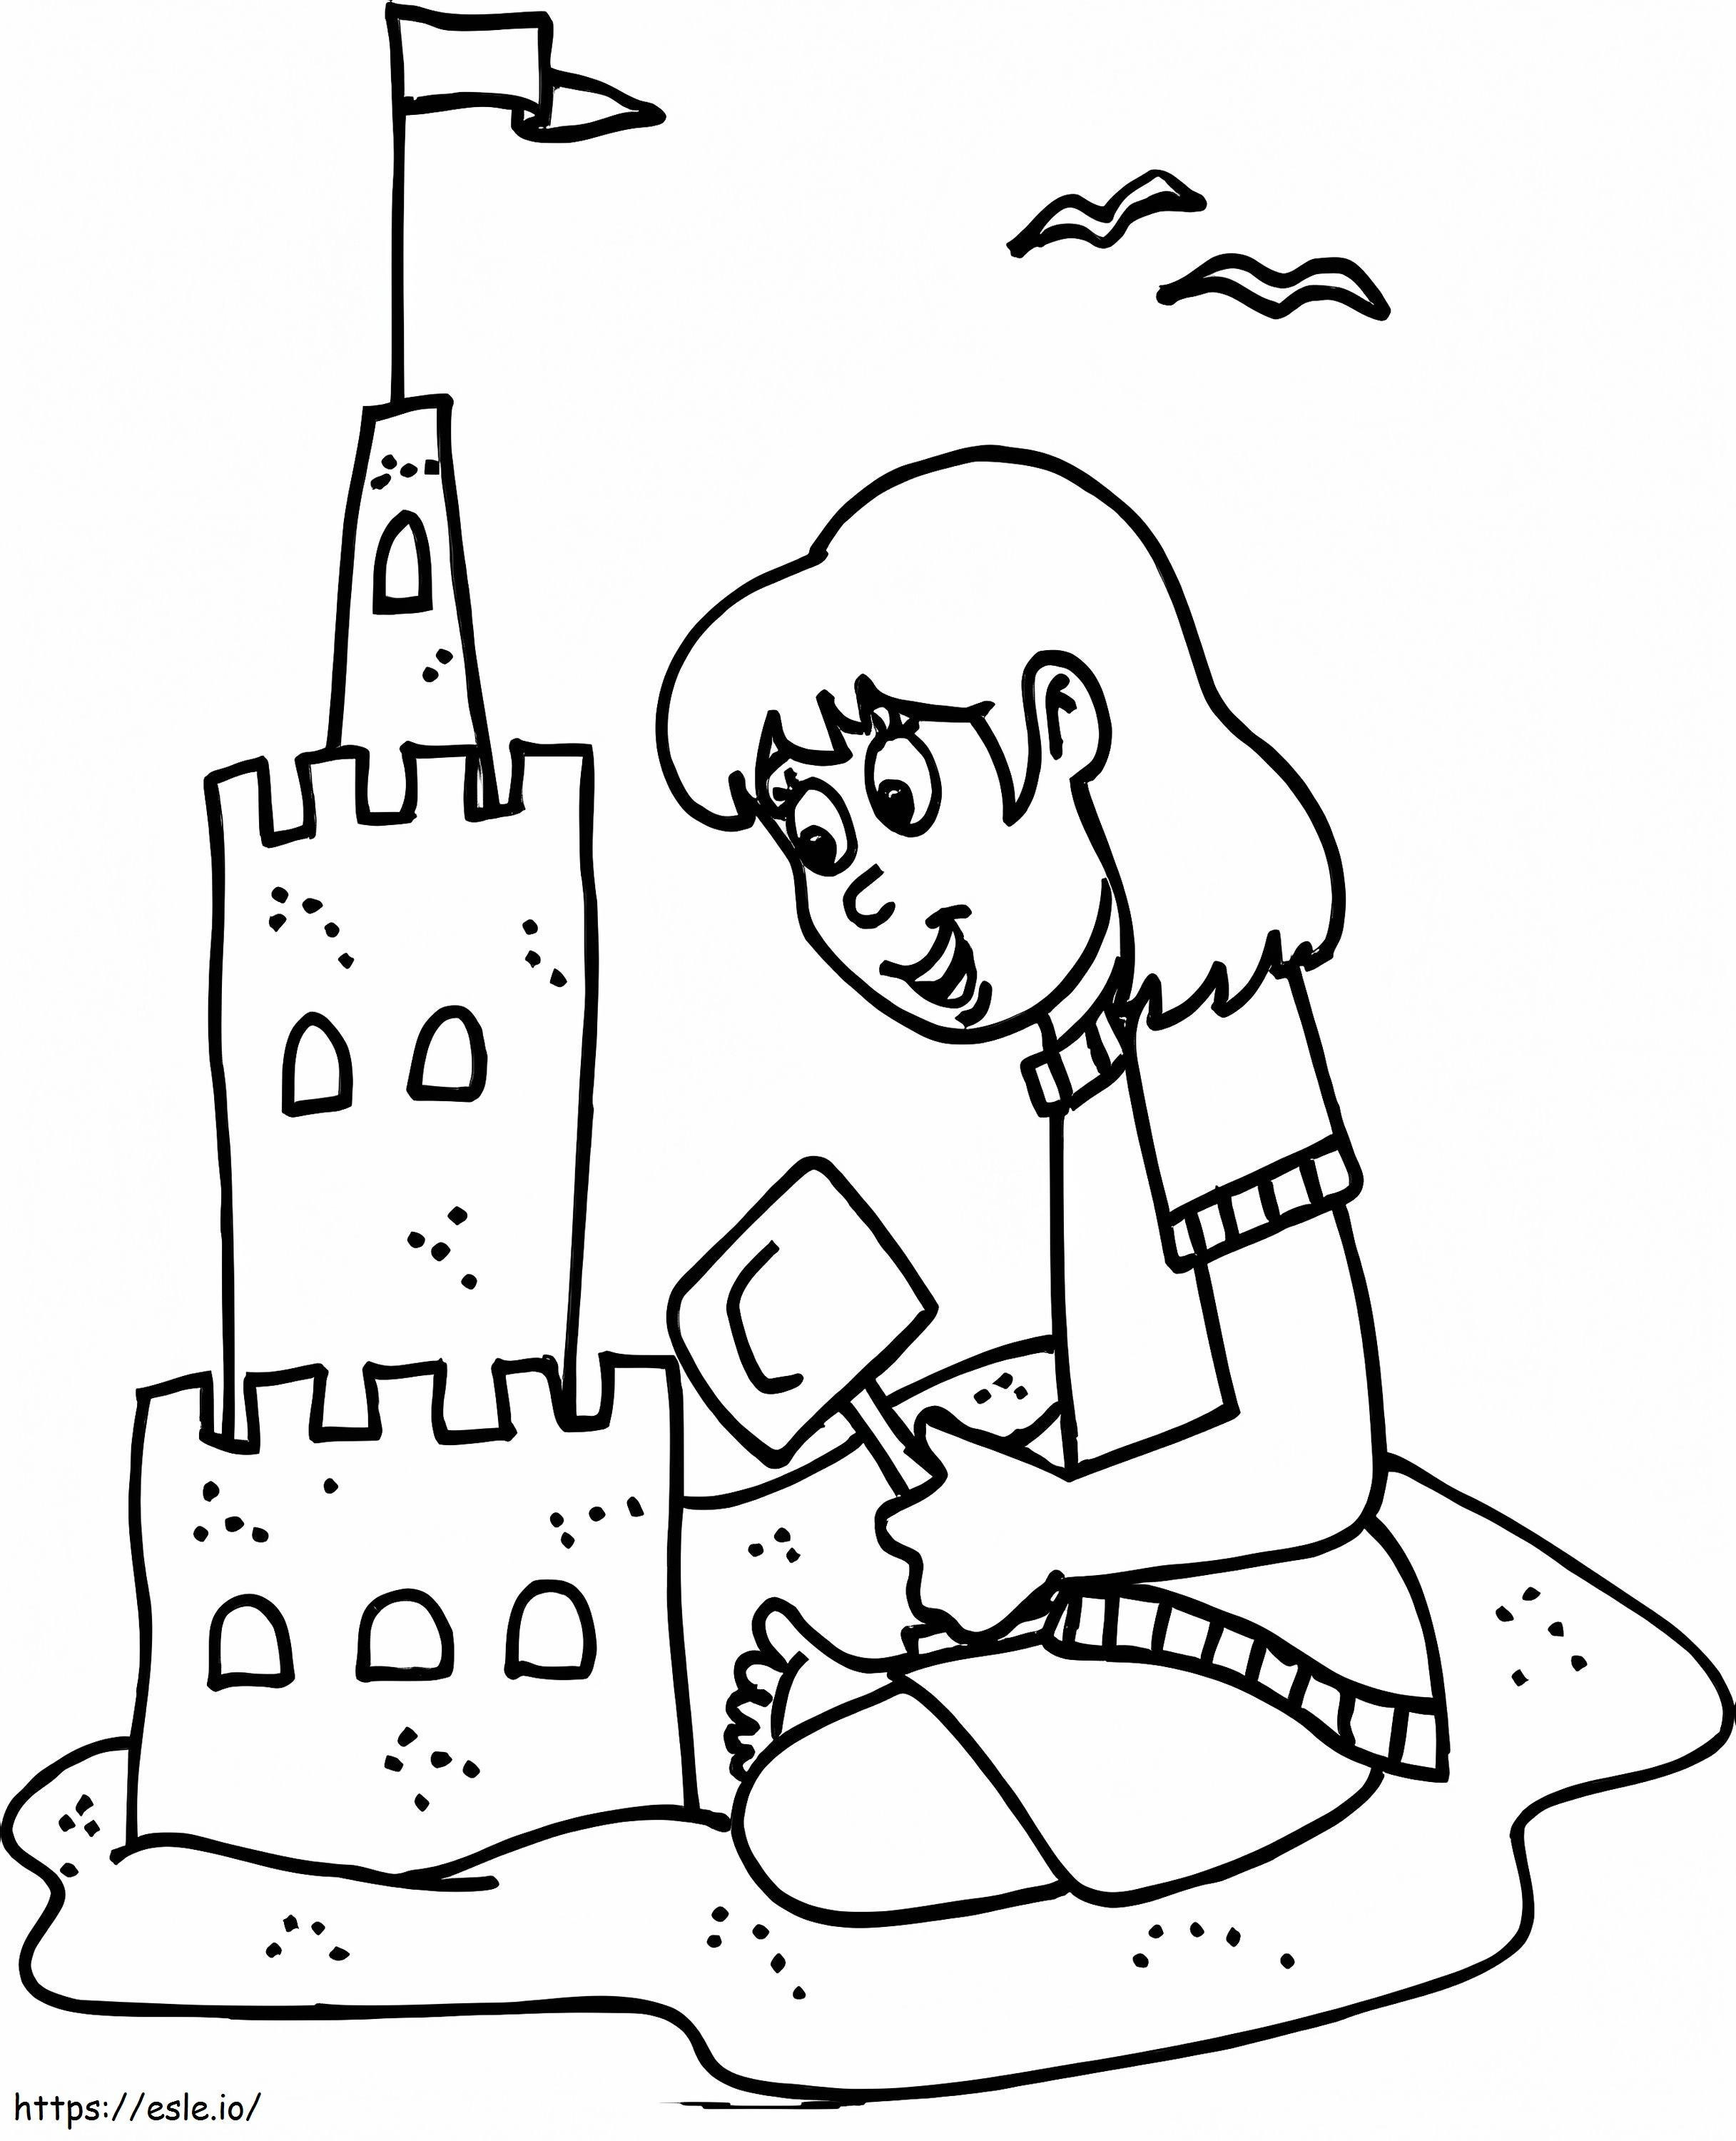 A Girl Building A Sand Castle coloring page